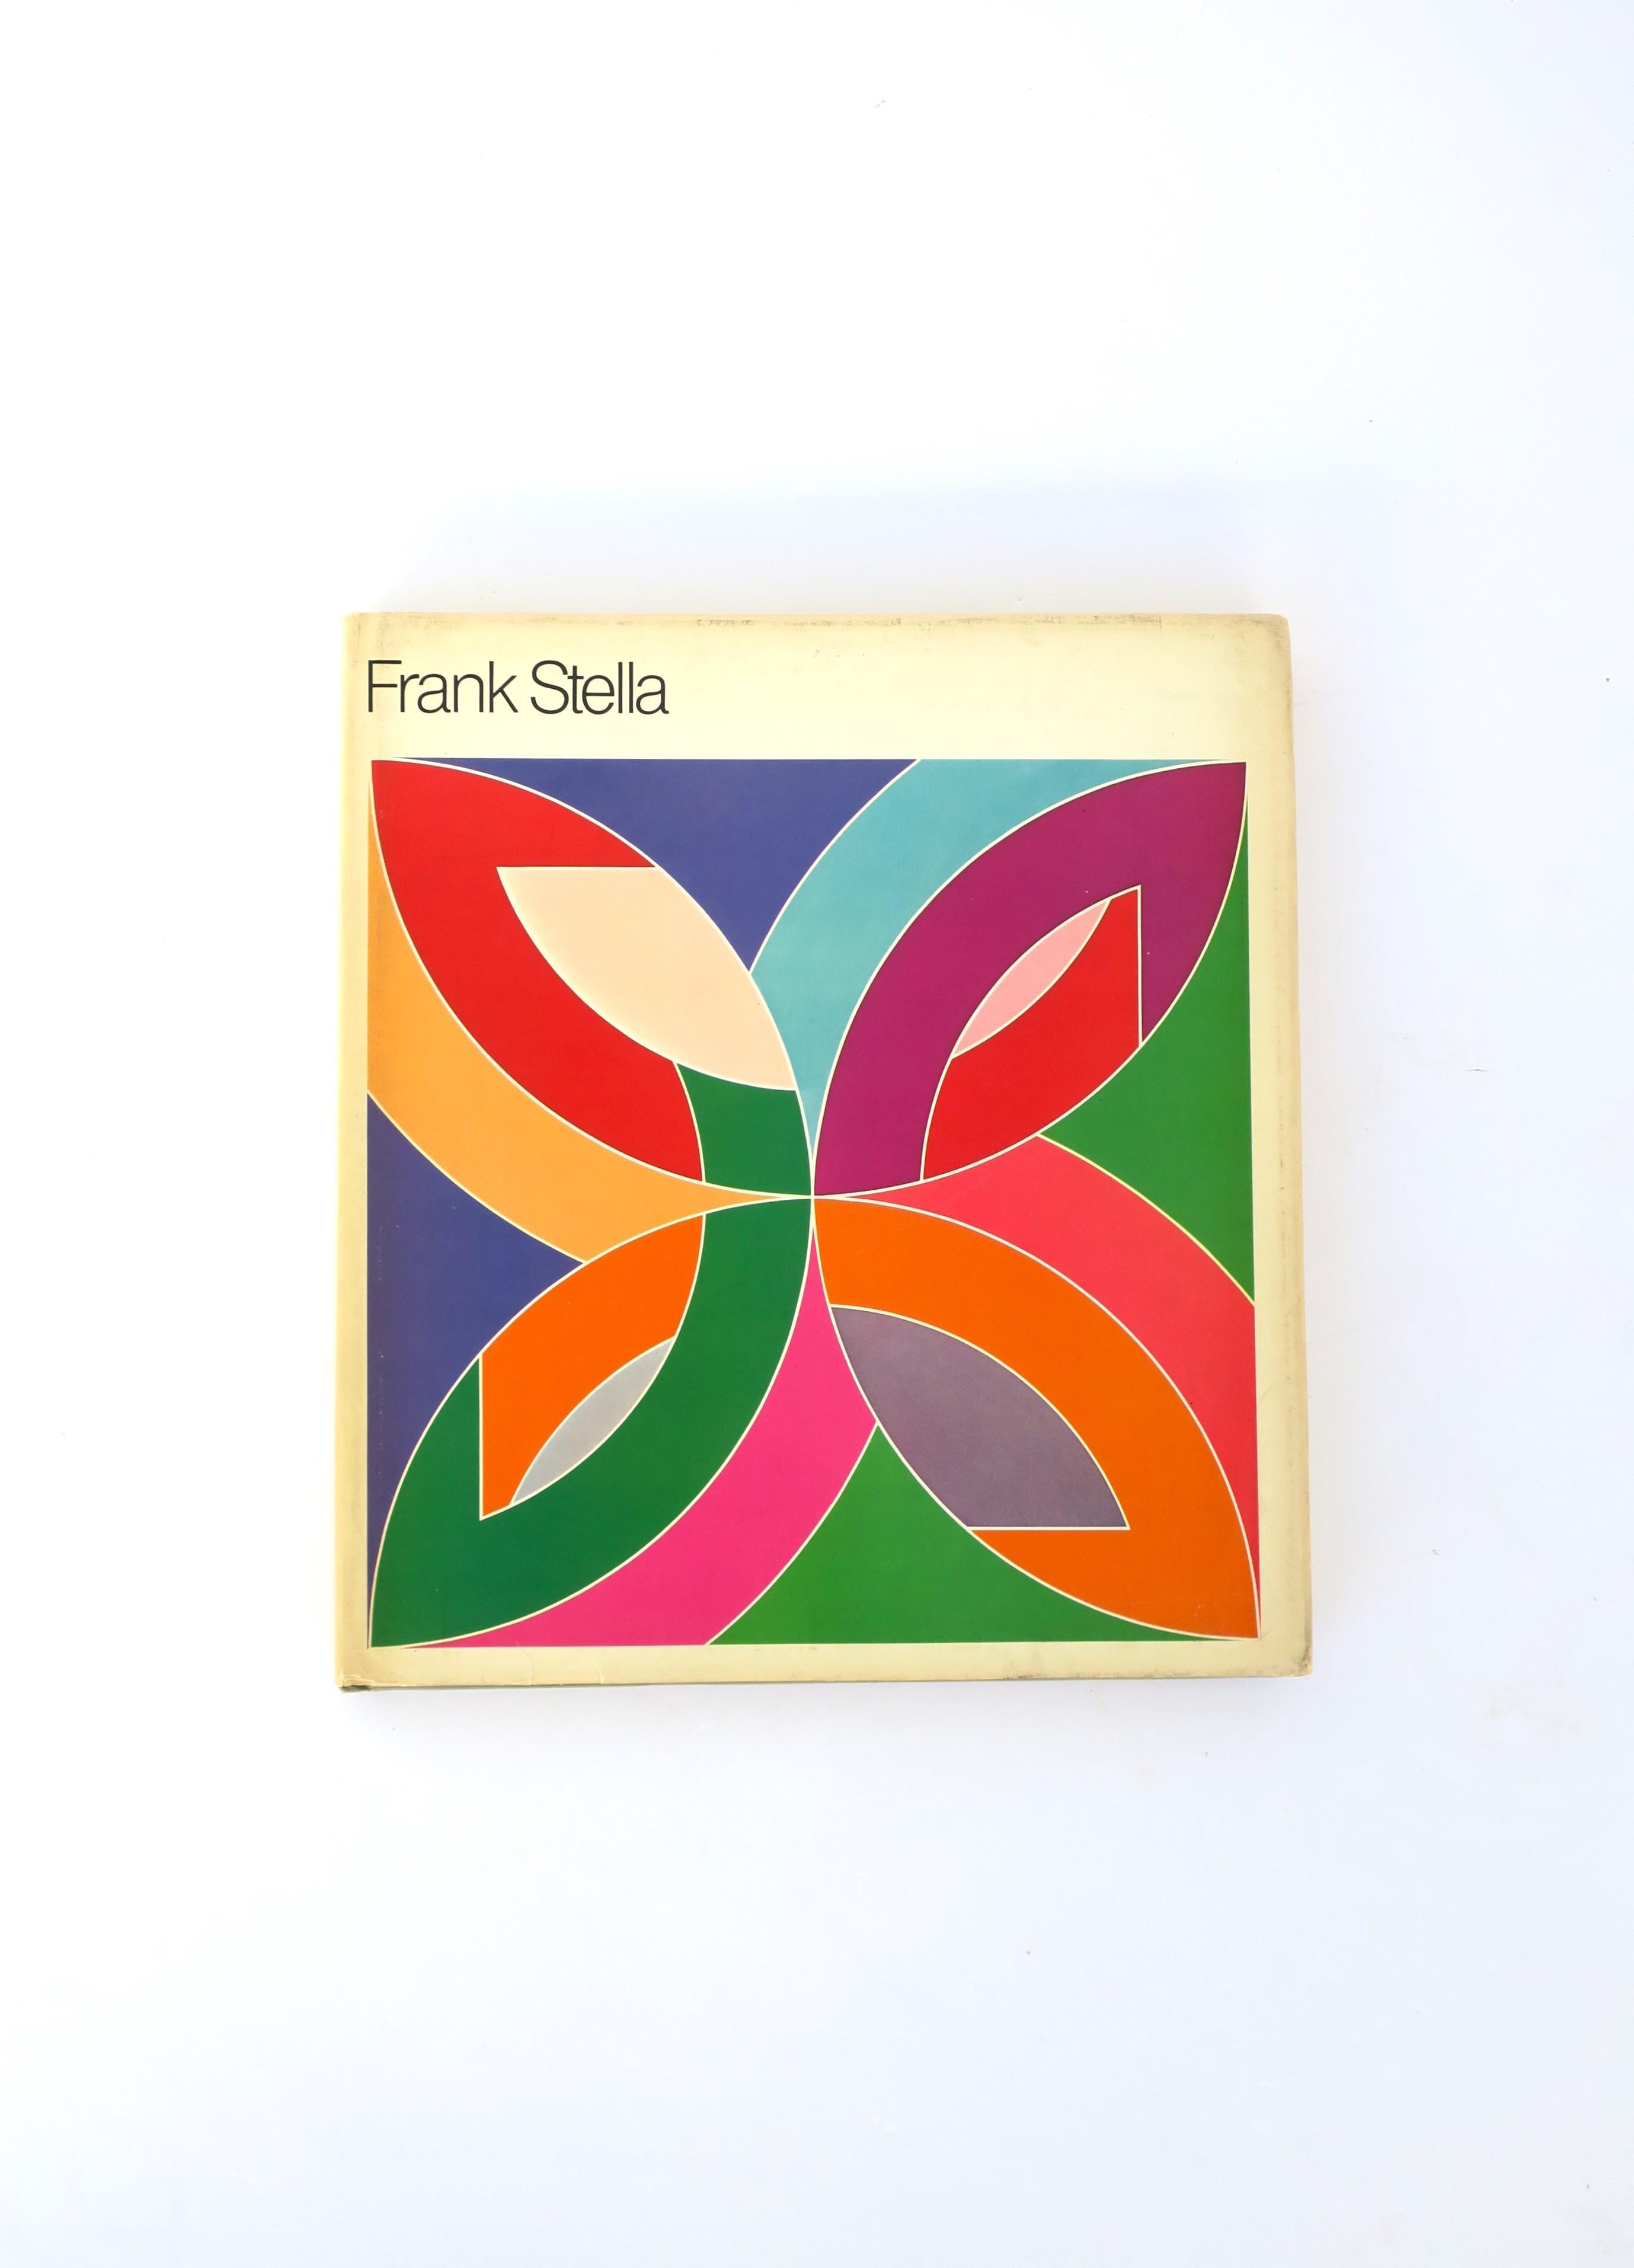 A hard-cover book with dust-jacket on abstract American artist Frank Stella, Metropolitan Museum of Art, 1970, New York, NY. This book presents a decade of Sella's work from 1959 - 1969. A great piece for a coffee table, library, collector, etc.